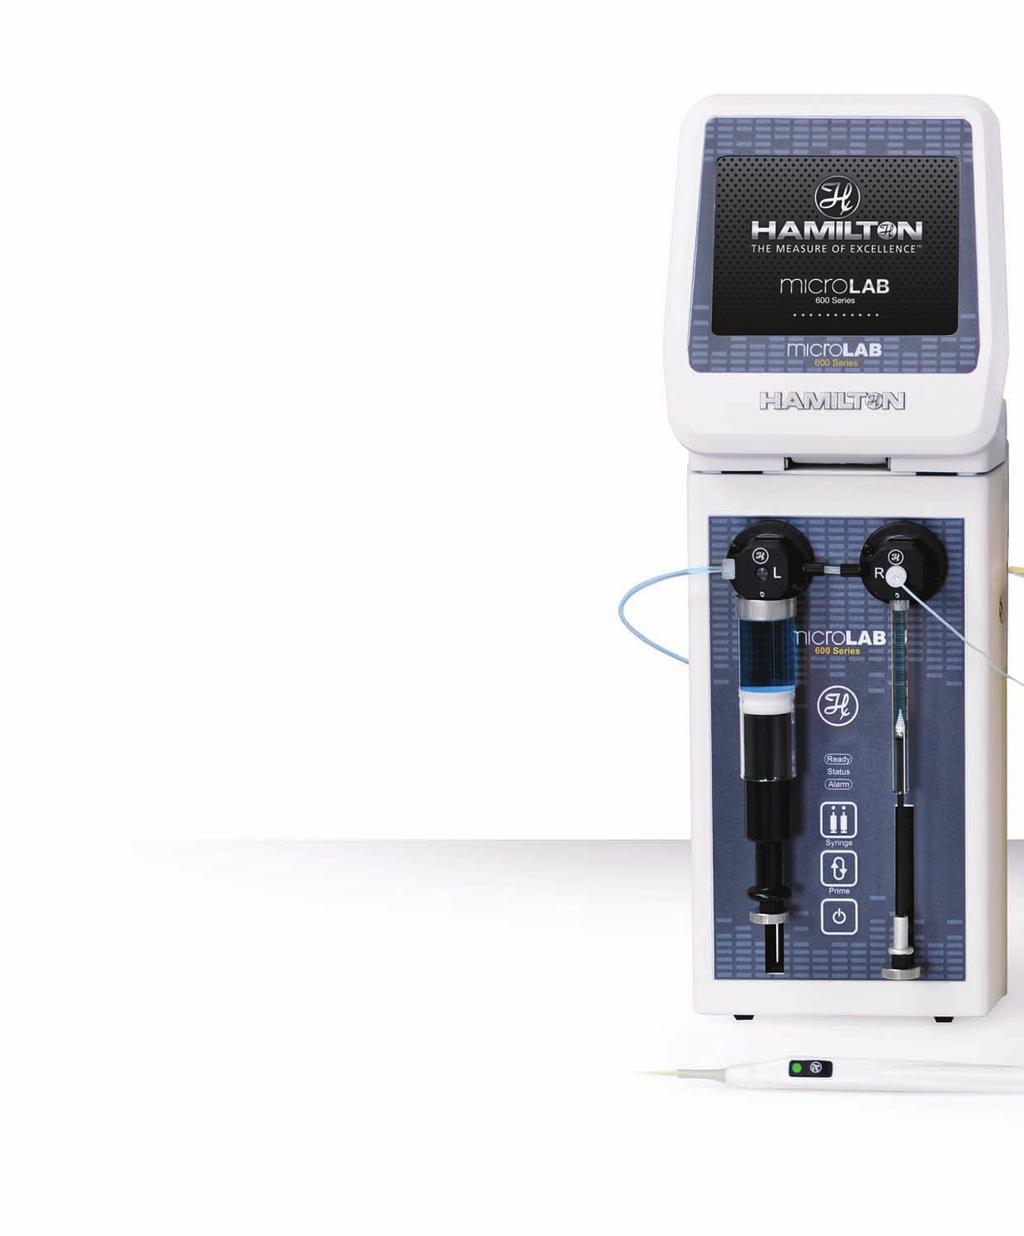 Introducing the MICROLAB 600 The MICROLAB 600 is a highly precise syringe pump with a graphical user interface designed to quickly and easily dilute and dispense liquids.